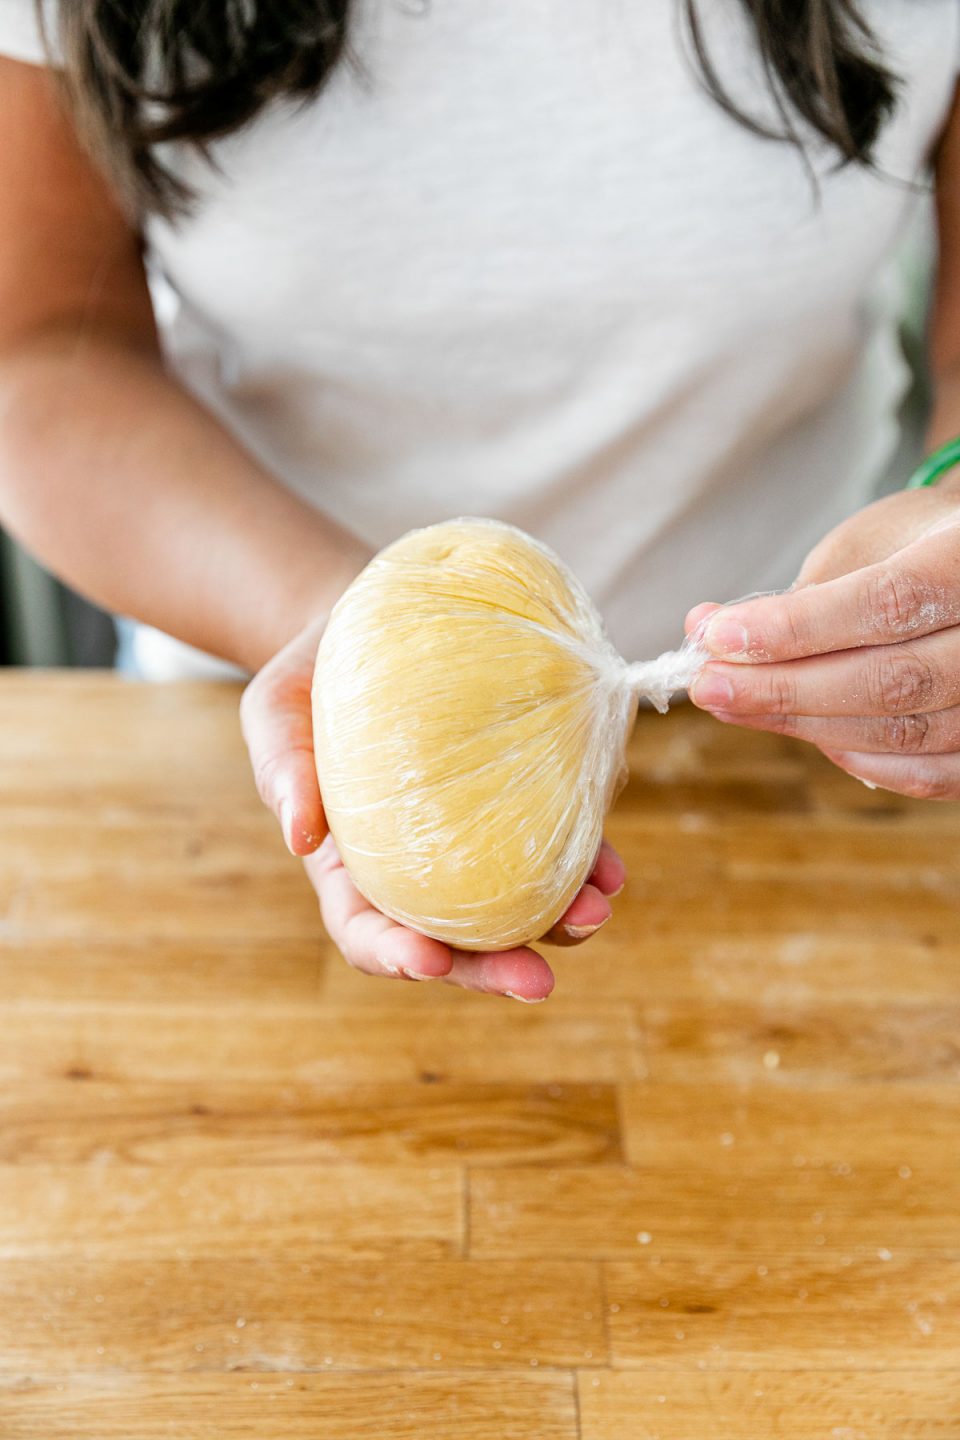 How to Make Homemade Pasta, Step 4: Rest the Pasta Dough. Jess of Plays Well With Butter holds a finished fresh pasta dough ball that has been tightly wrapped in plastic to allow it to rest.